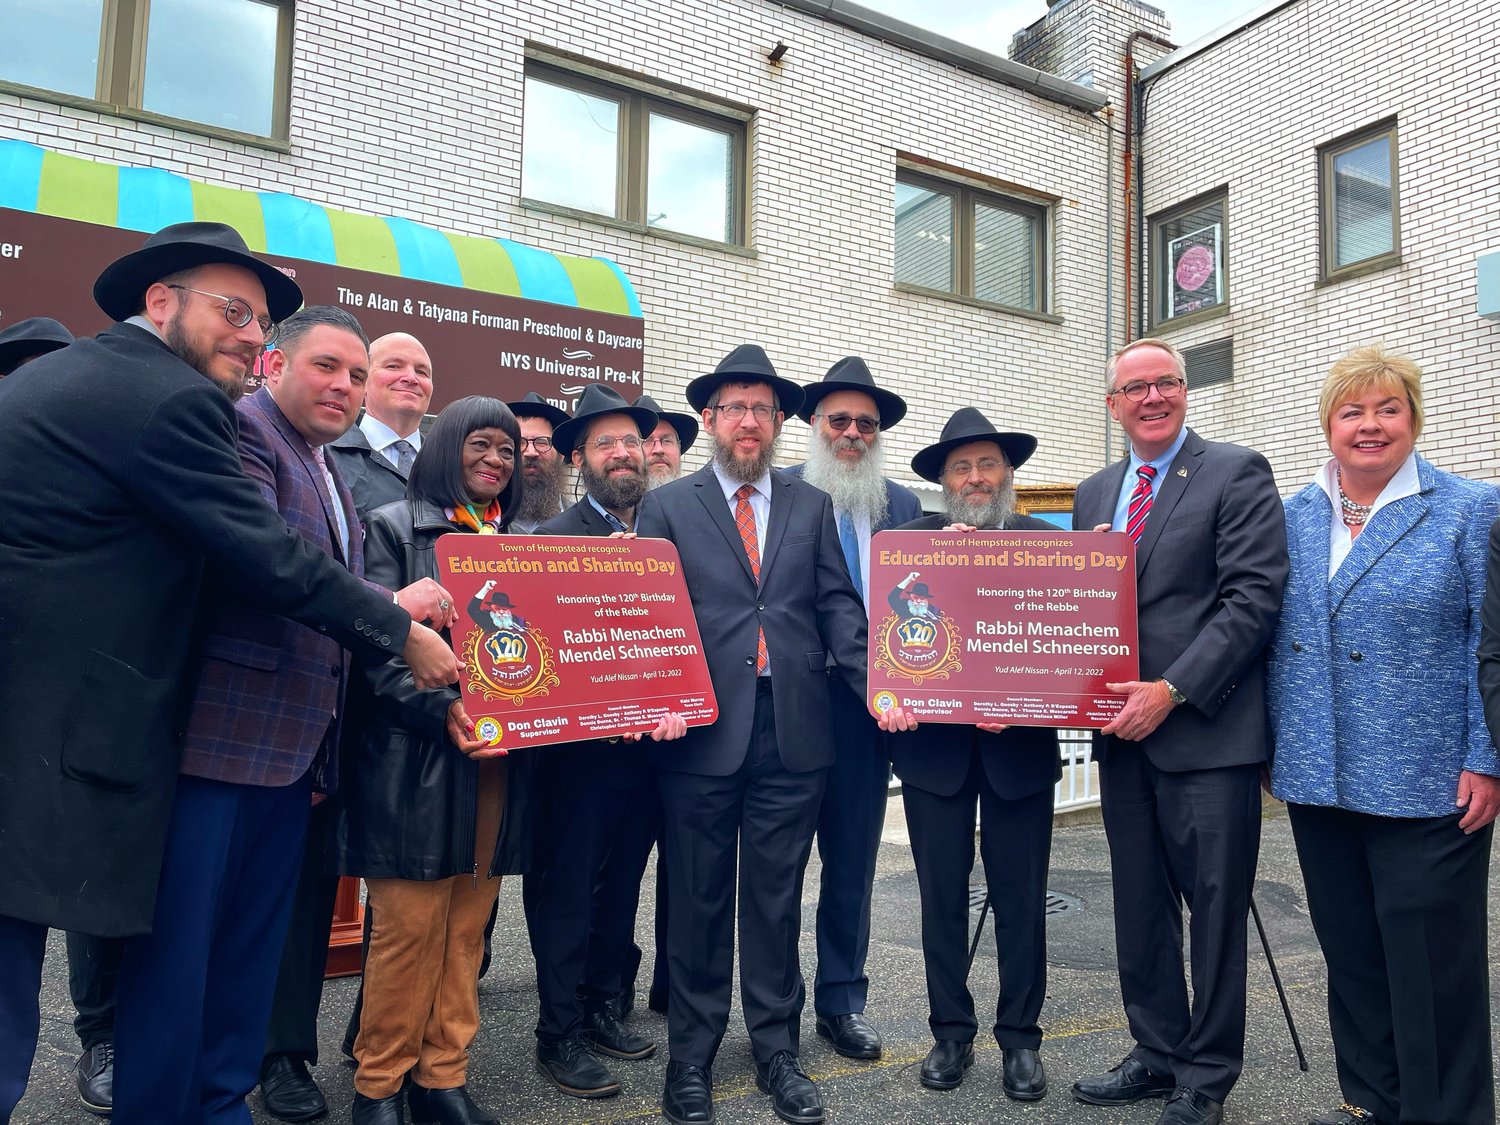 Each Chabad in the Town of Hempstead was given a commemorative sign. Chabad centers are known for their community outreach and welcoming facilities to people of all religions and backgrounds.